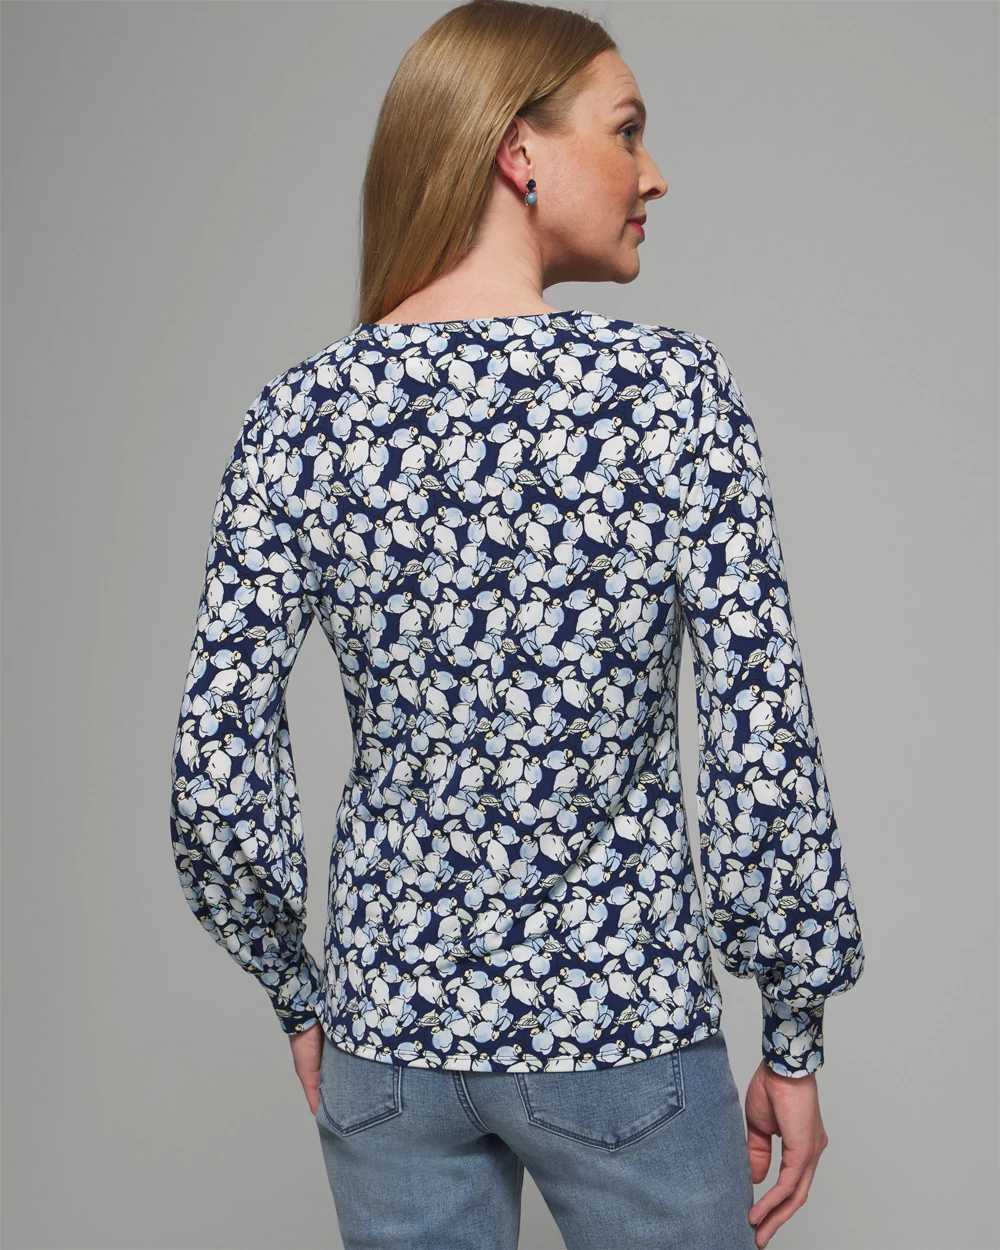 Outlet WHBM Notch Neck Top click to view larger image.